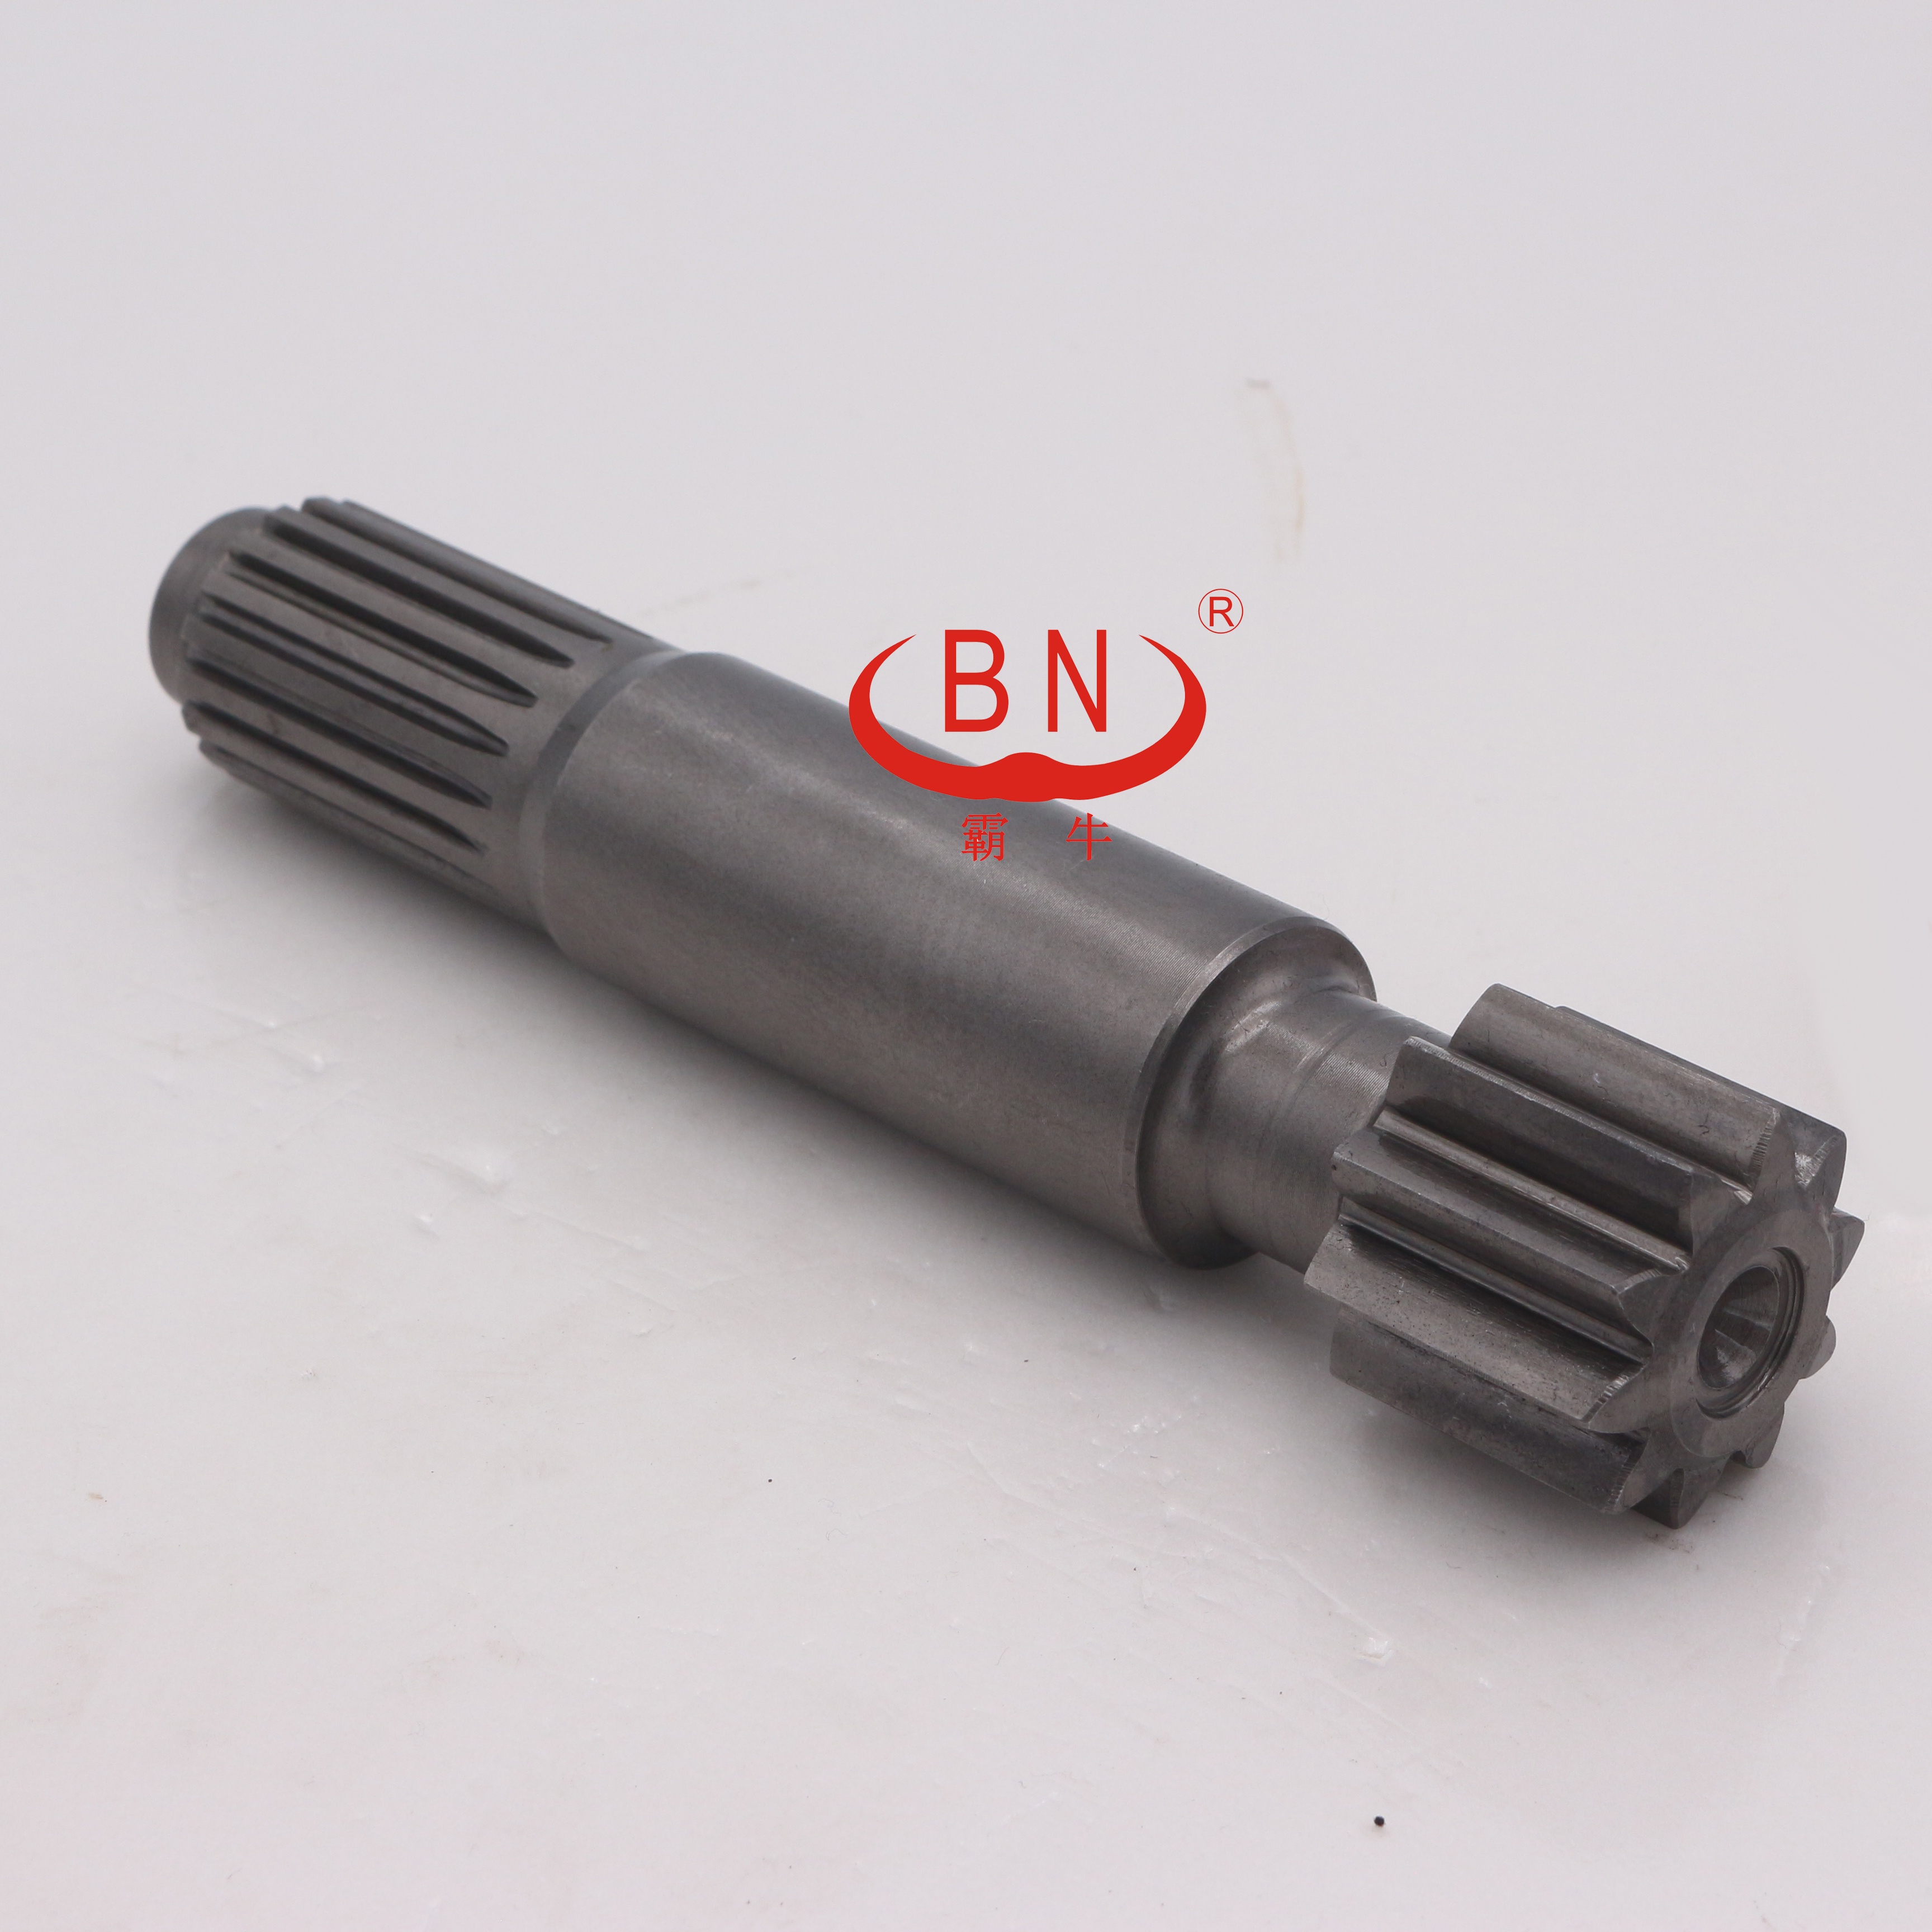 20Y-27-31140 Excavator Travel Reduction Parts Final Drive Shaft for Komatsu PC200-7 #203013up